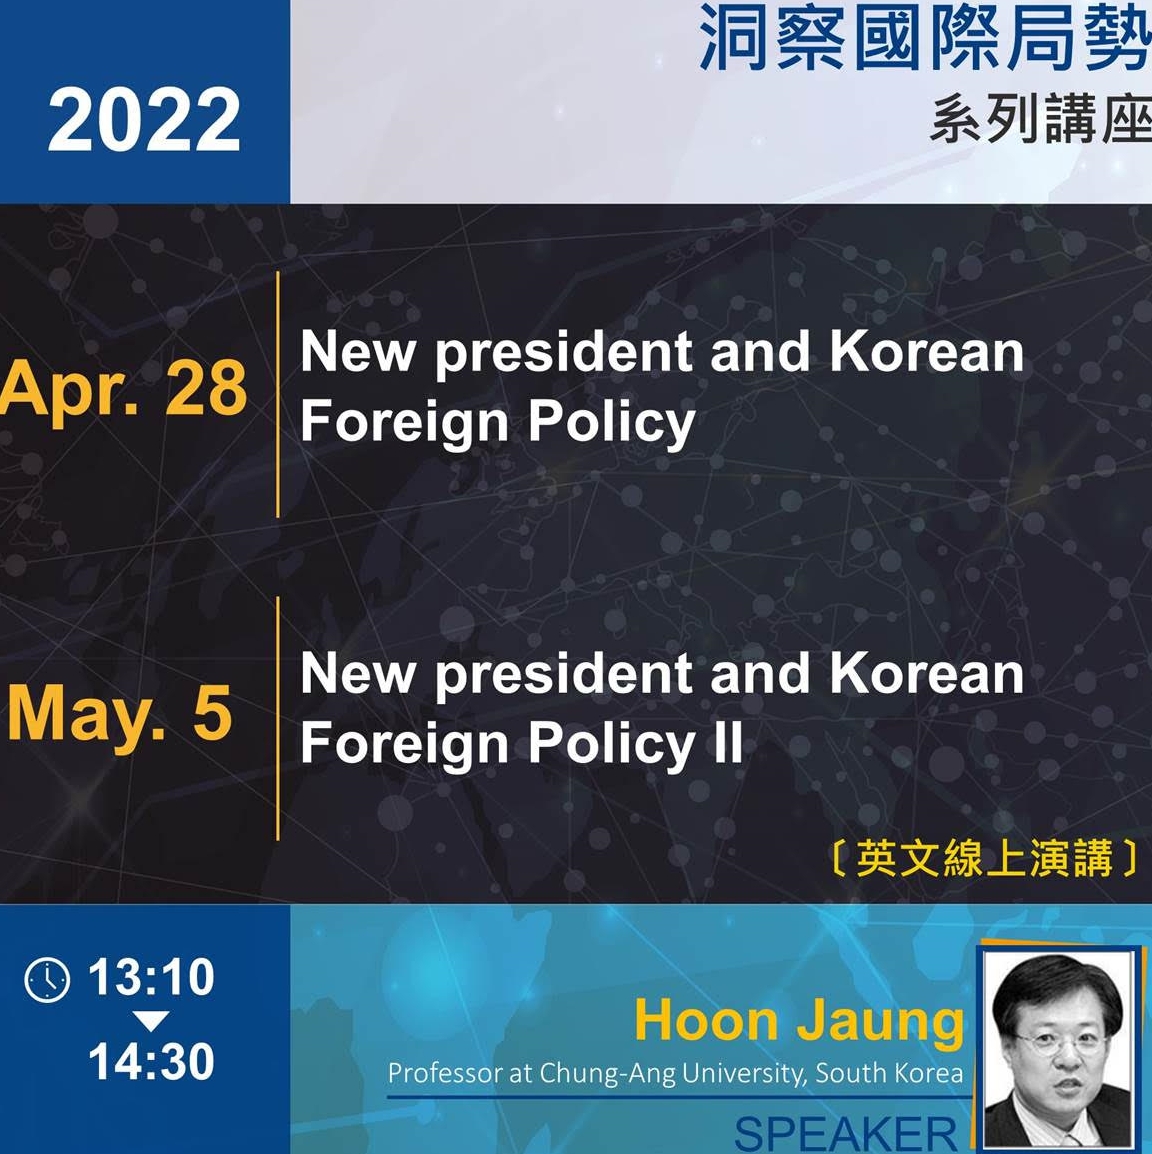 Hoon Jaung：New president and Korean Foreign Policy(4/28)、New president and Korean Foreign Policy II(5/5)